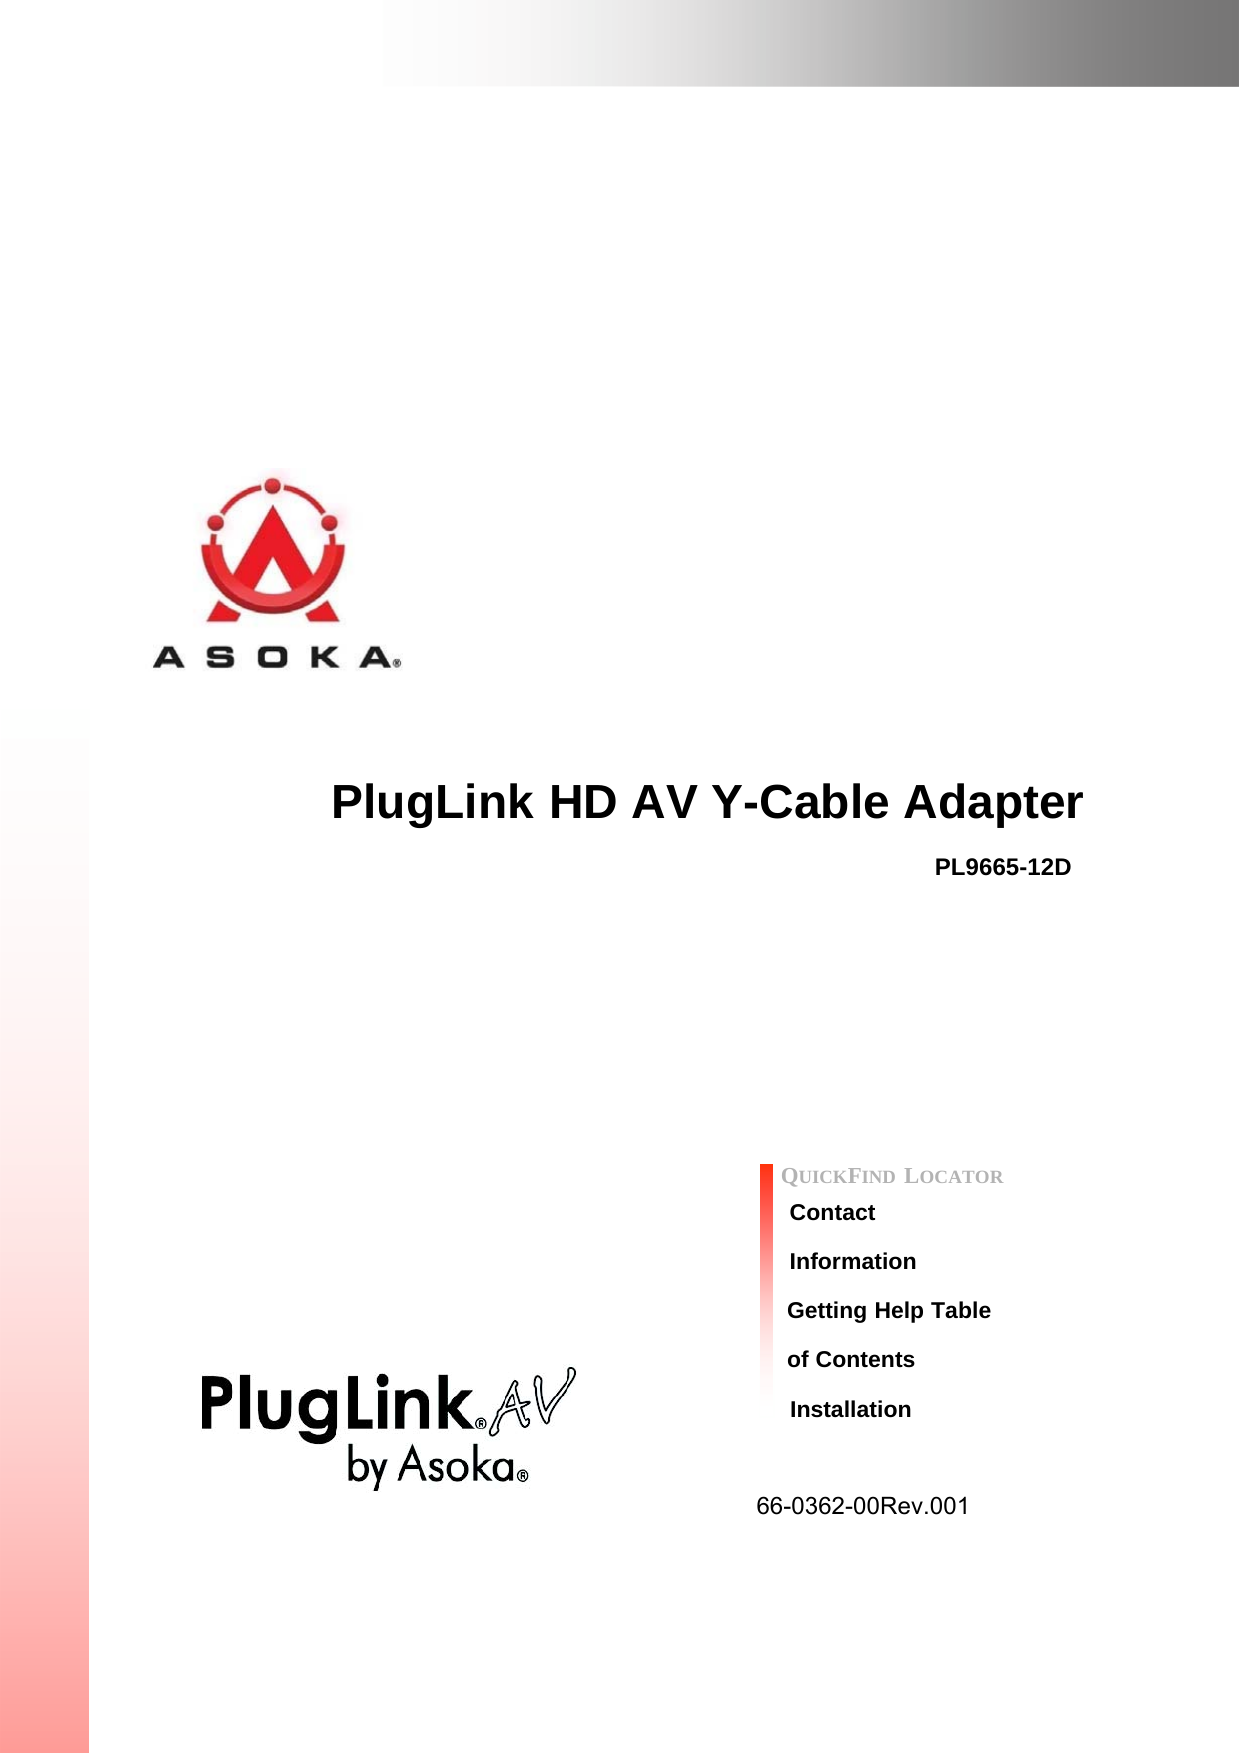                     PlugLink HD AV Y-Cable Adapter  PL9665-12D               QUICKFIND LOCATOR Contact  Information Getting Help Table of Contents                                          Installation 66-0362-00Rev.001 